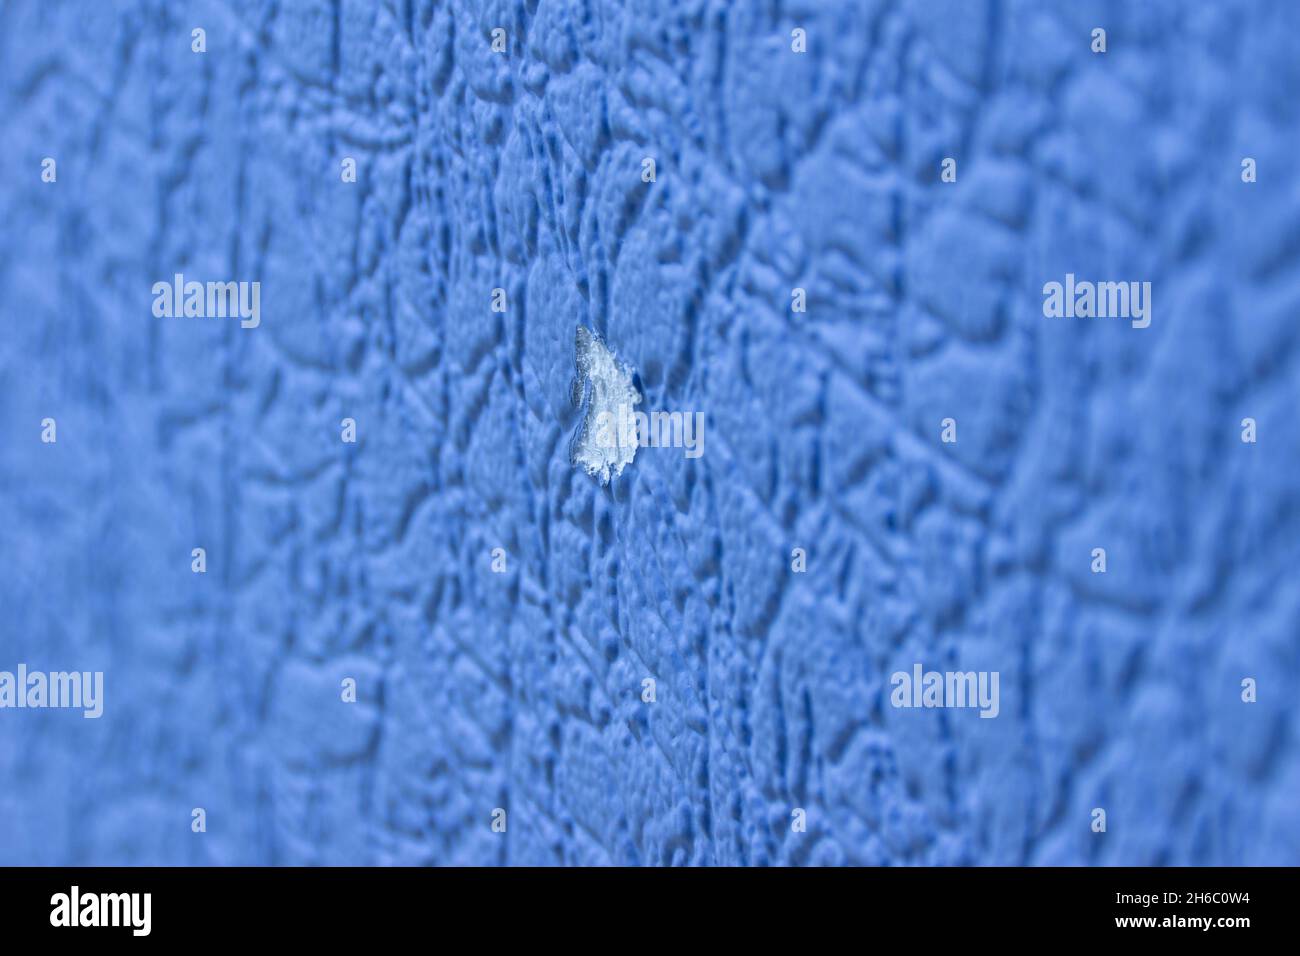 In the new blue wall, damaged vinyl wallpaper damage resulted in a large white spot, selective focus Stock Photo